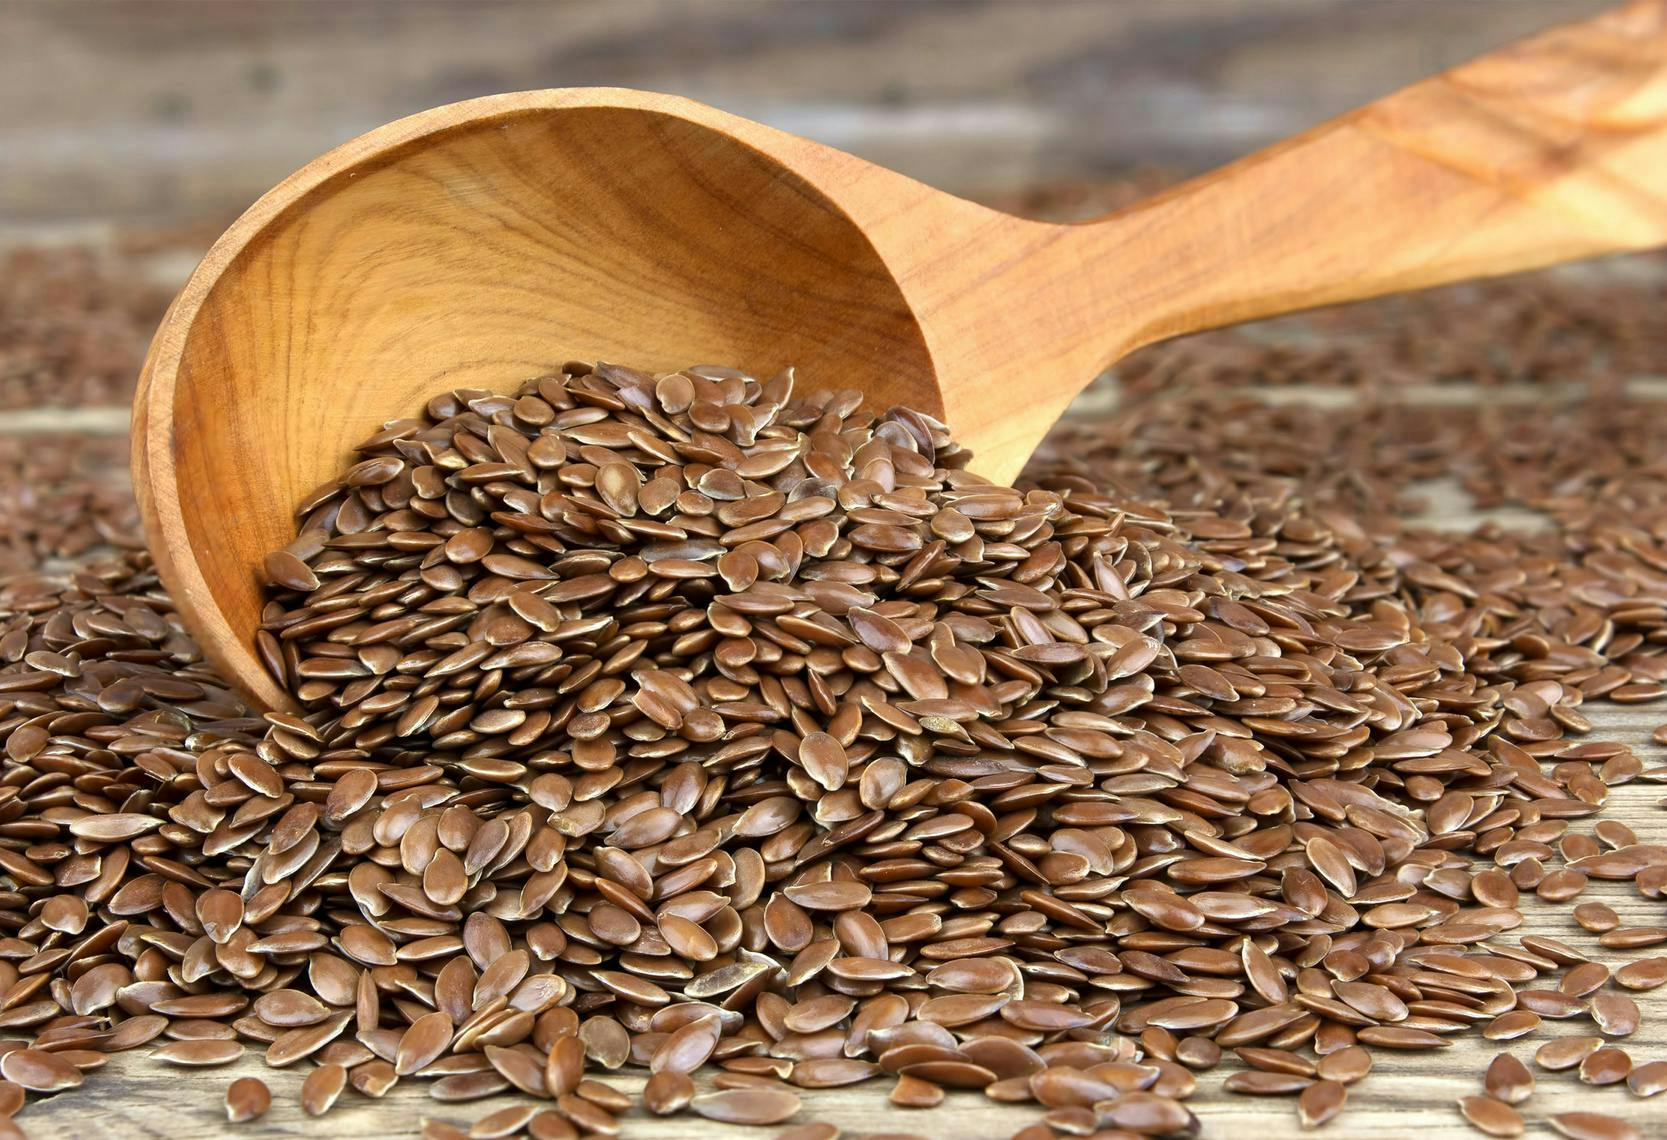 flax seed seeds wooden spoon flaxseed background food healthy brown health diet nutrition ingredient raw pile heap whole fatty linseed vintage group wooden spoon cutlery plant